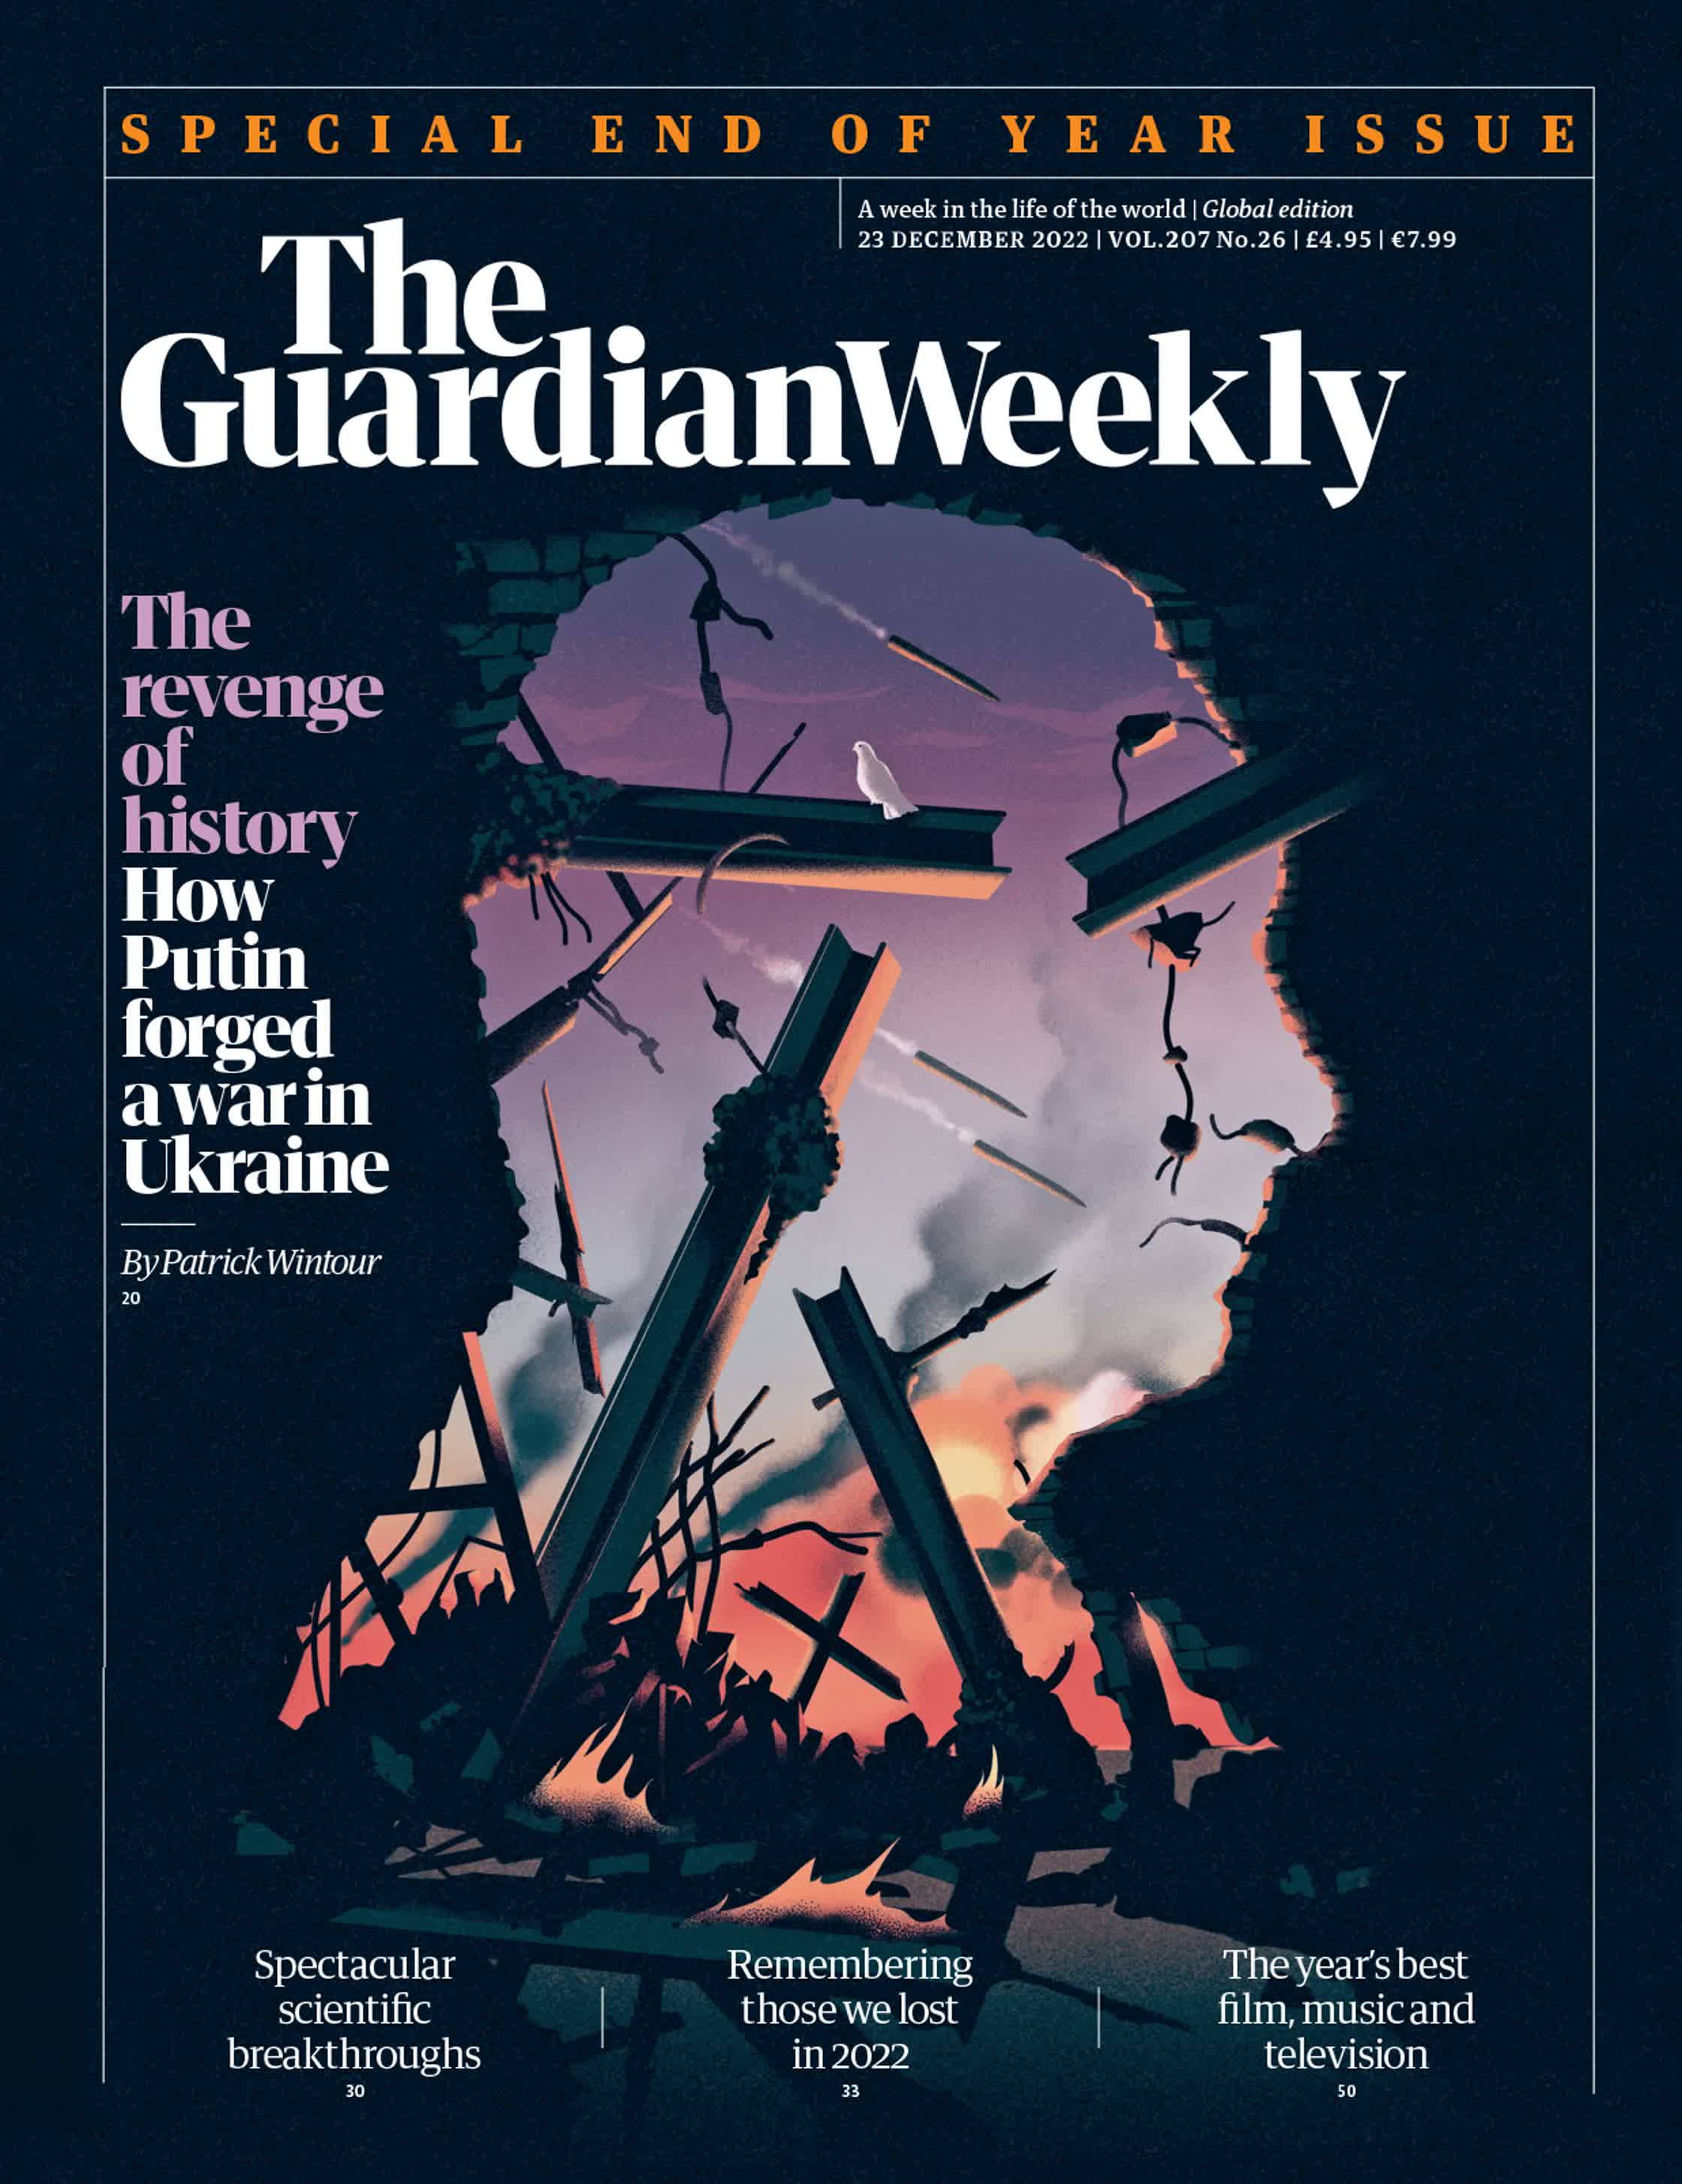 THE GUARDIAN WEEKLY_COVER_THE REVENGE OF HISTORY.jpg